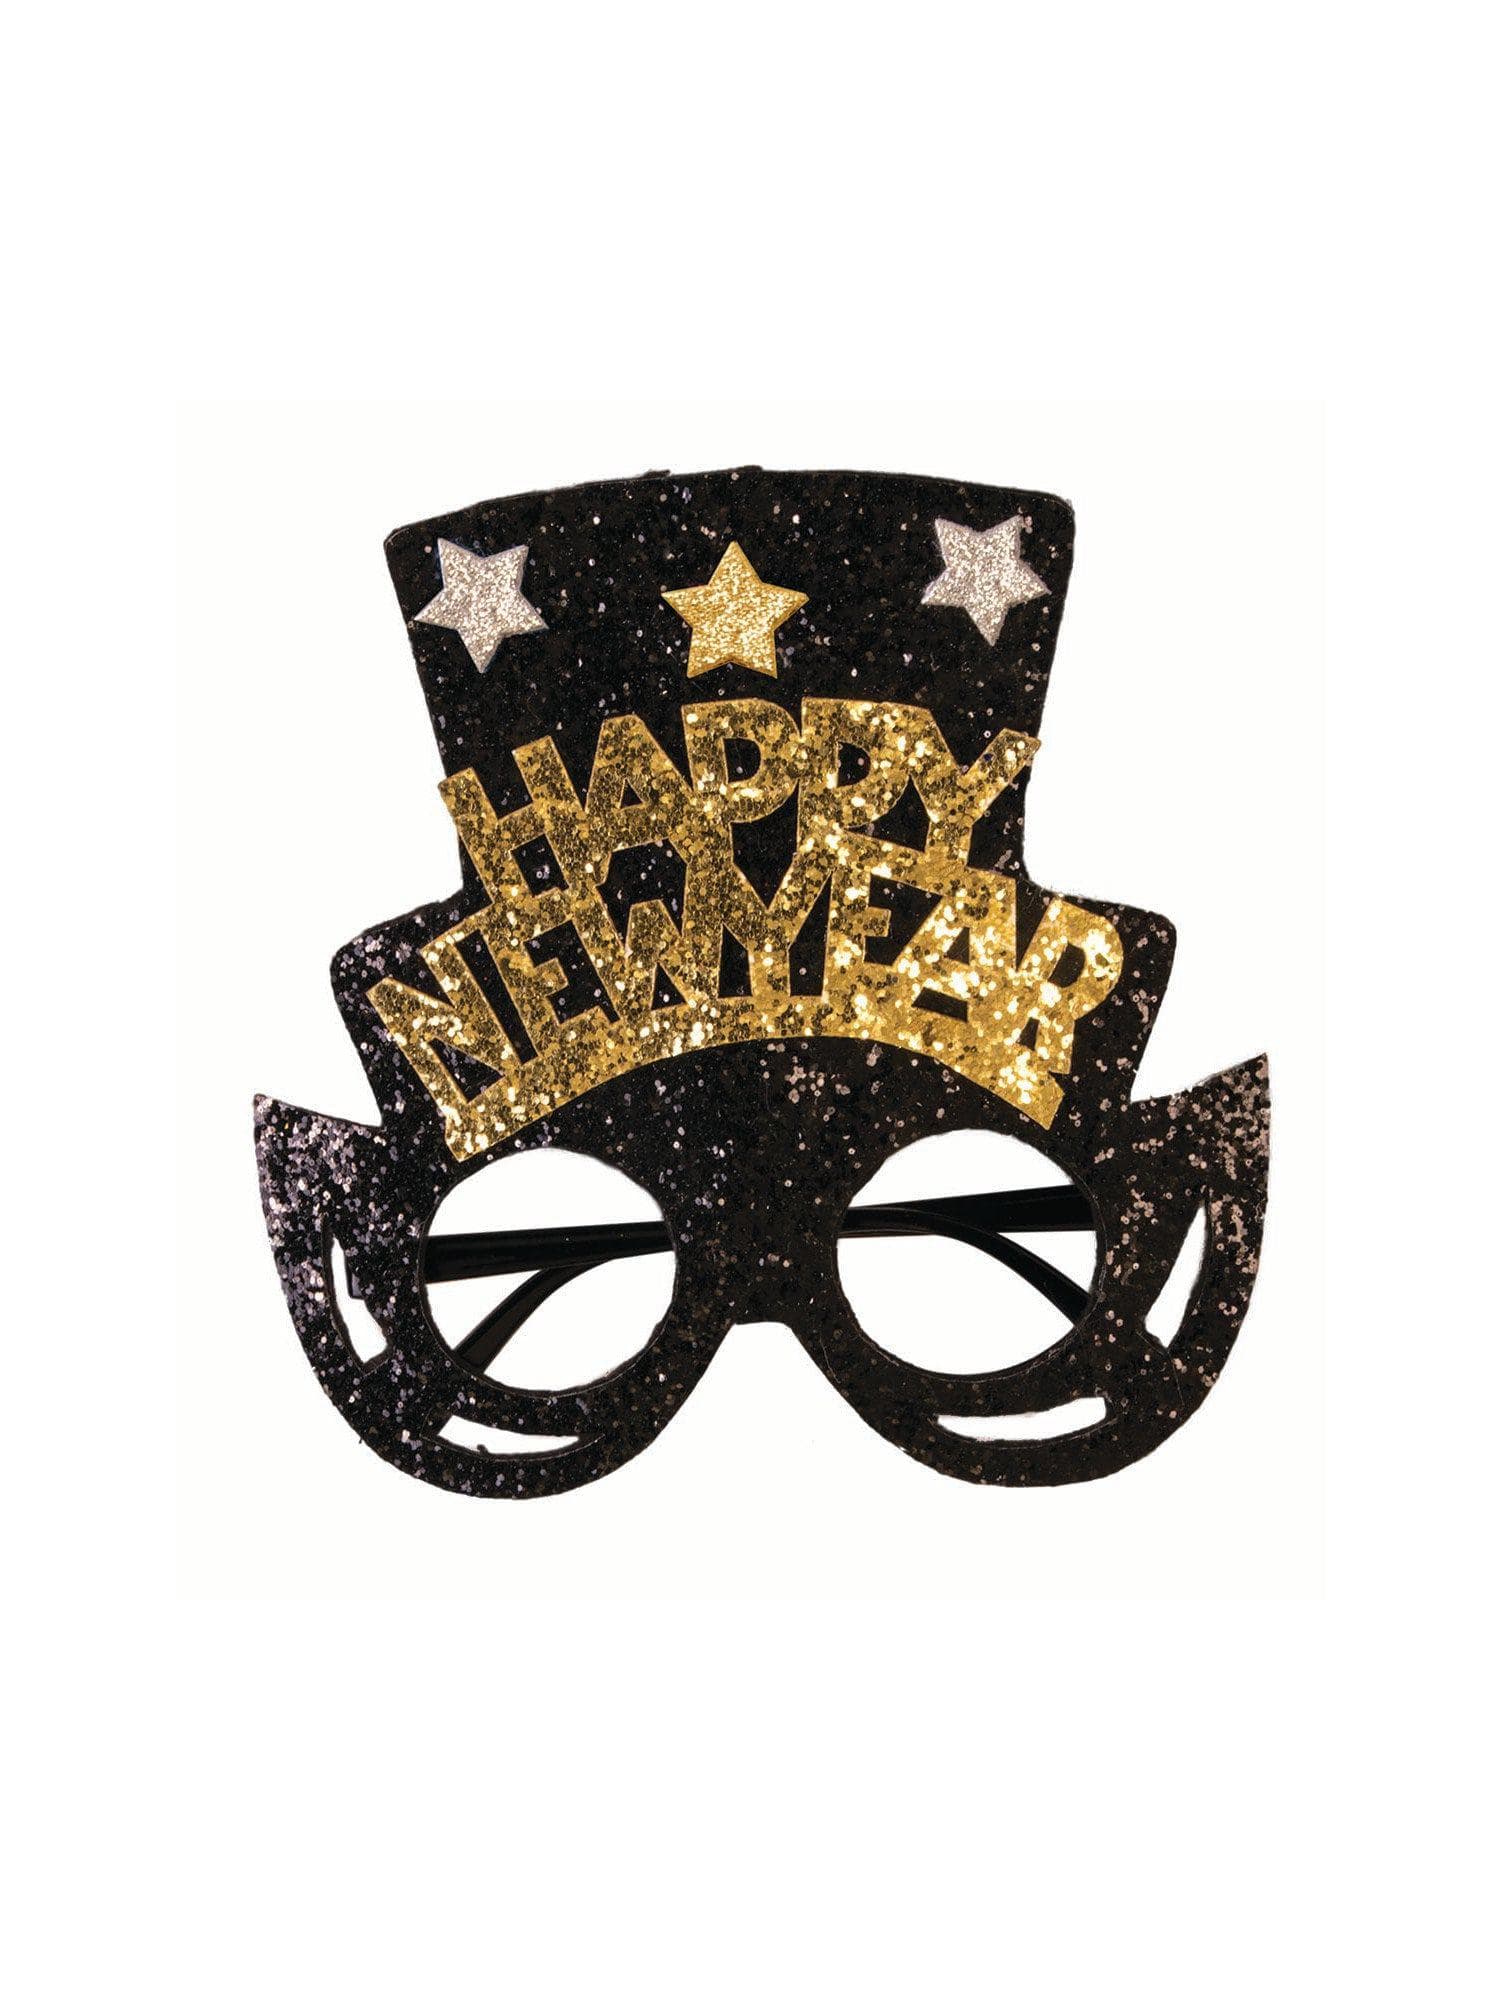 Adult Black and Gold Happy New Year's Top Hat Glasses - costumes.com